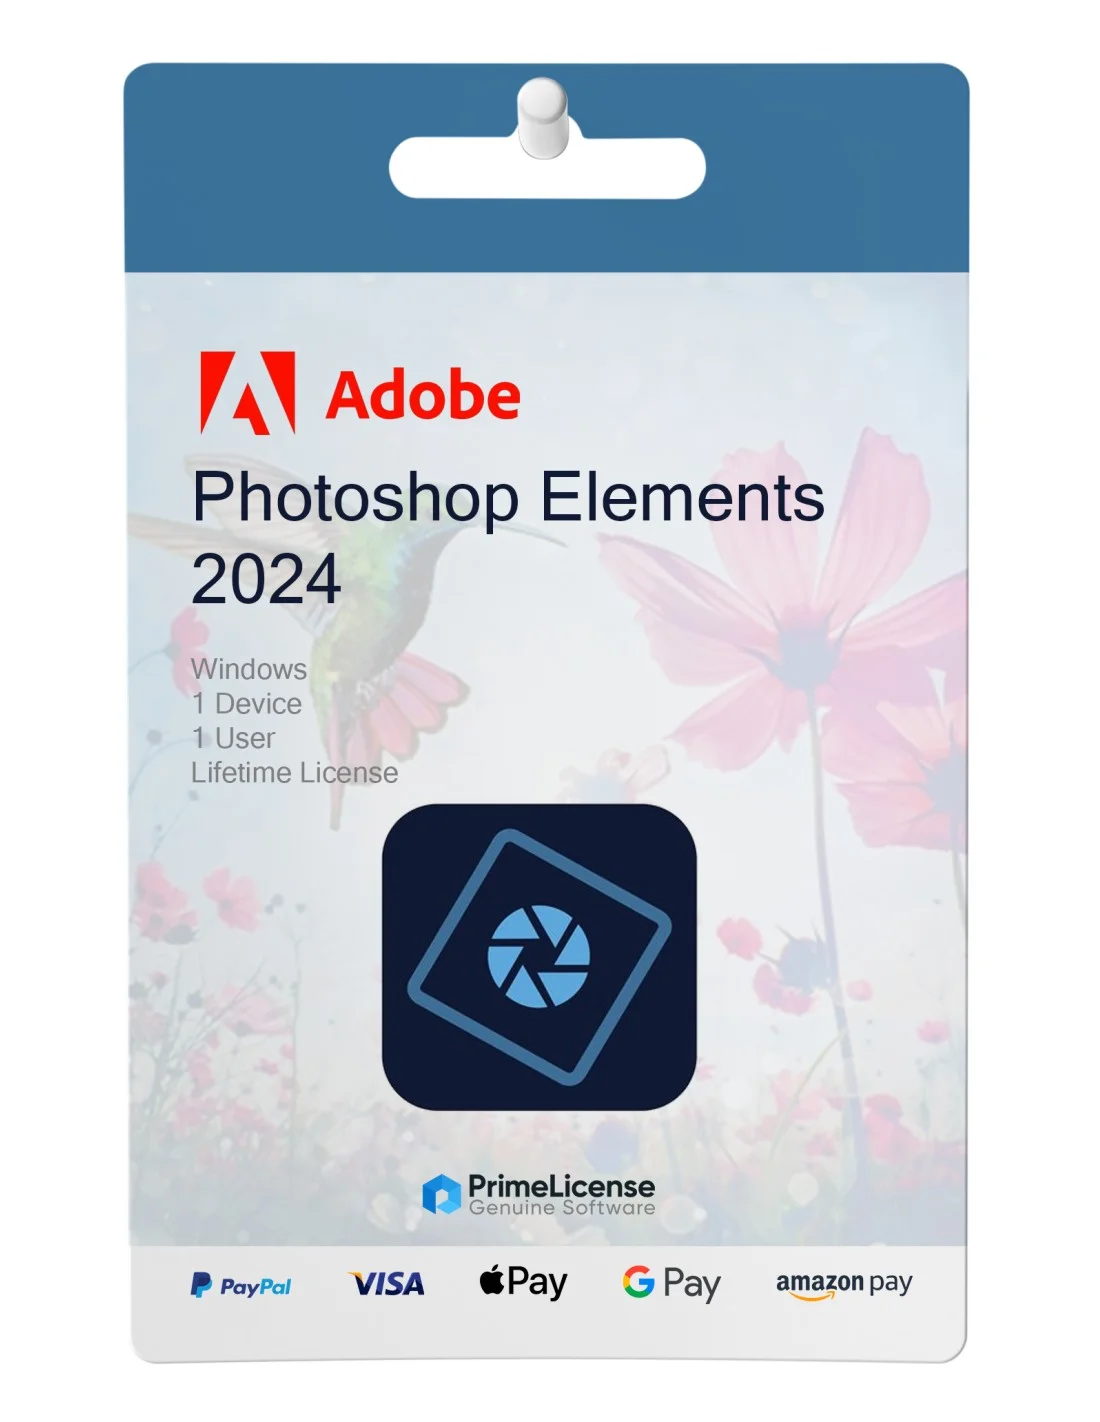 Purchase Adobe Elements 2024 Online from PrimeLicense